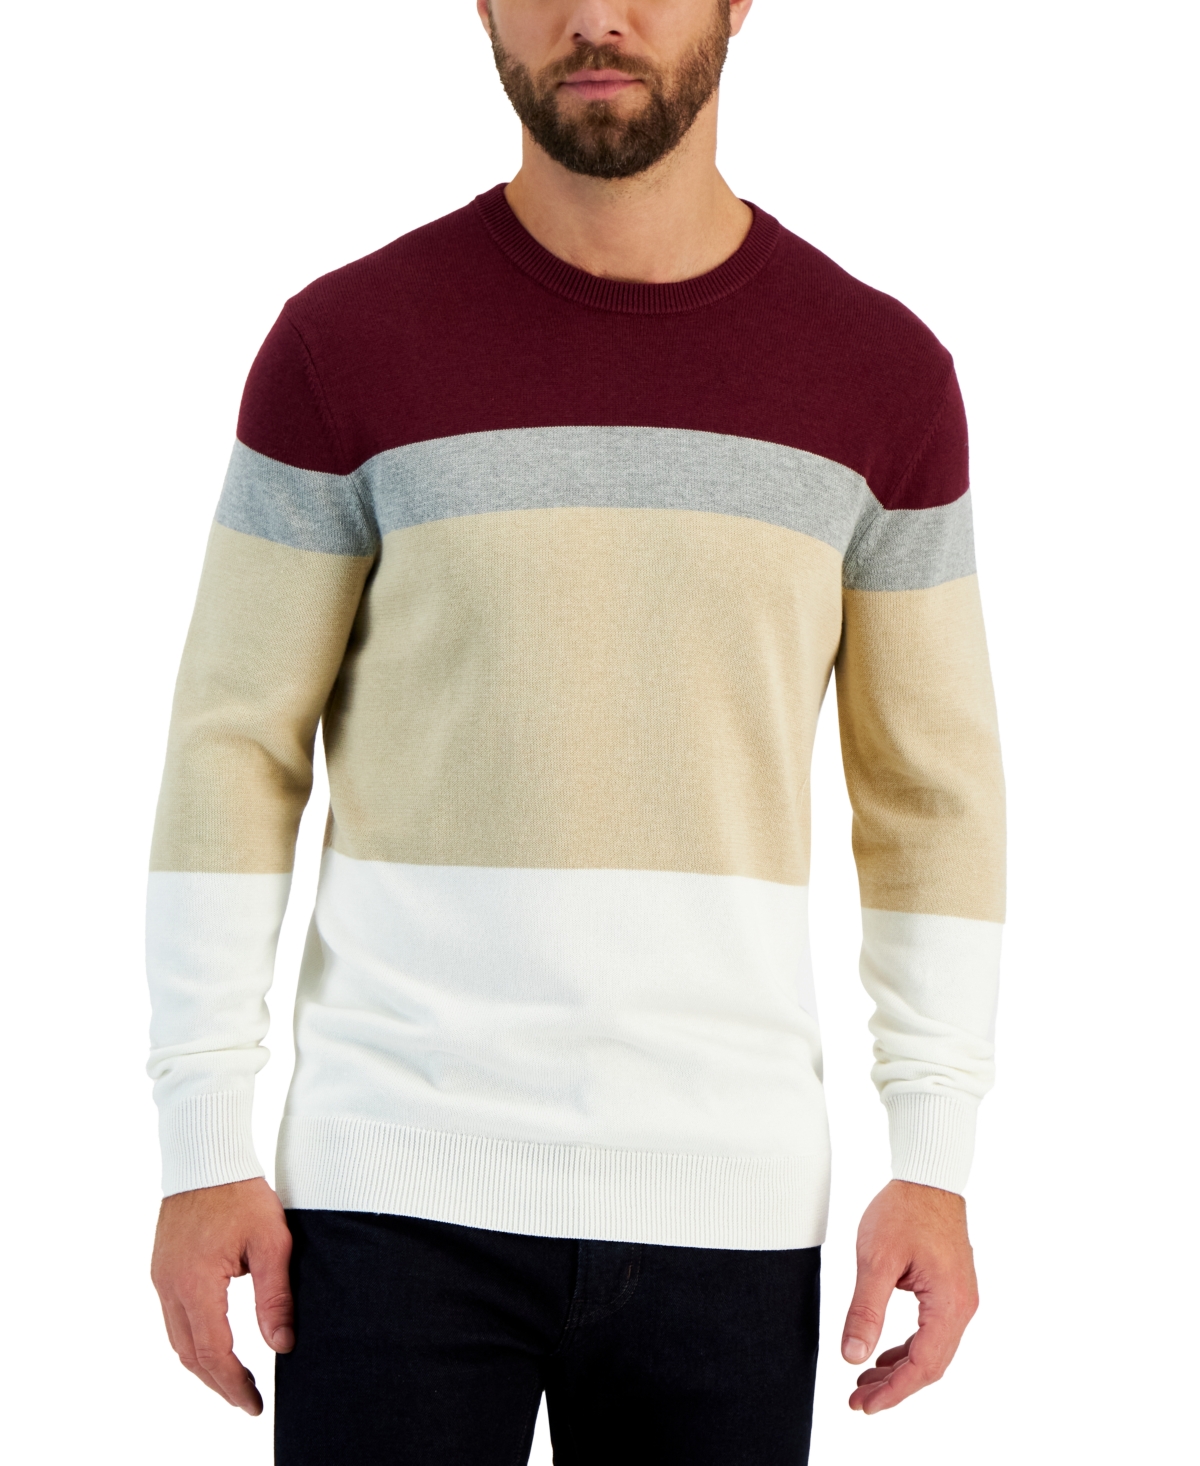 Men's Elevated Marled Colorblocked Long Sleeve Crewneck Sweater, Created for Macy's - Red Plum